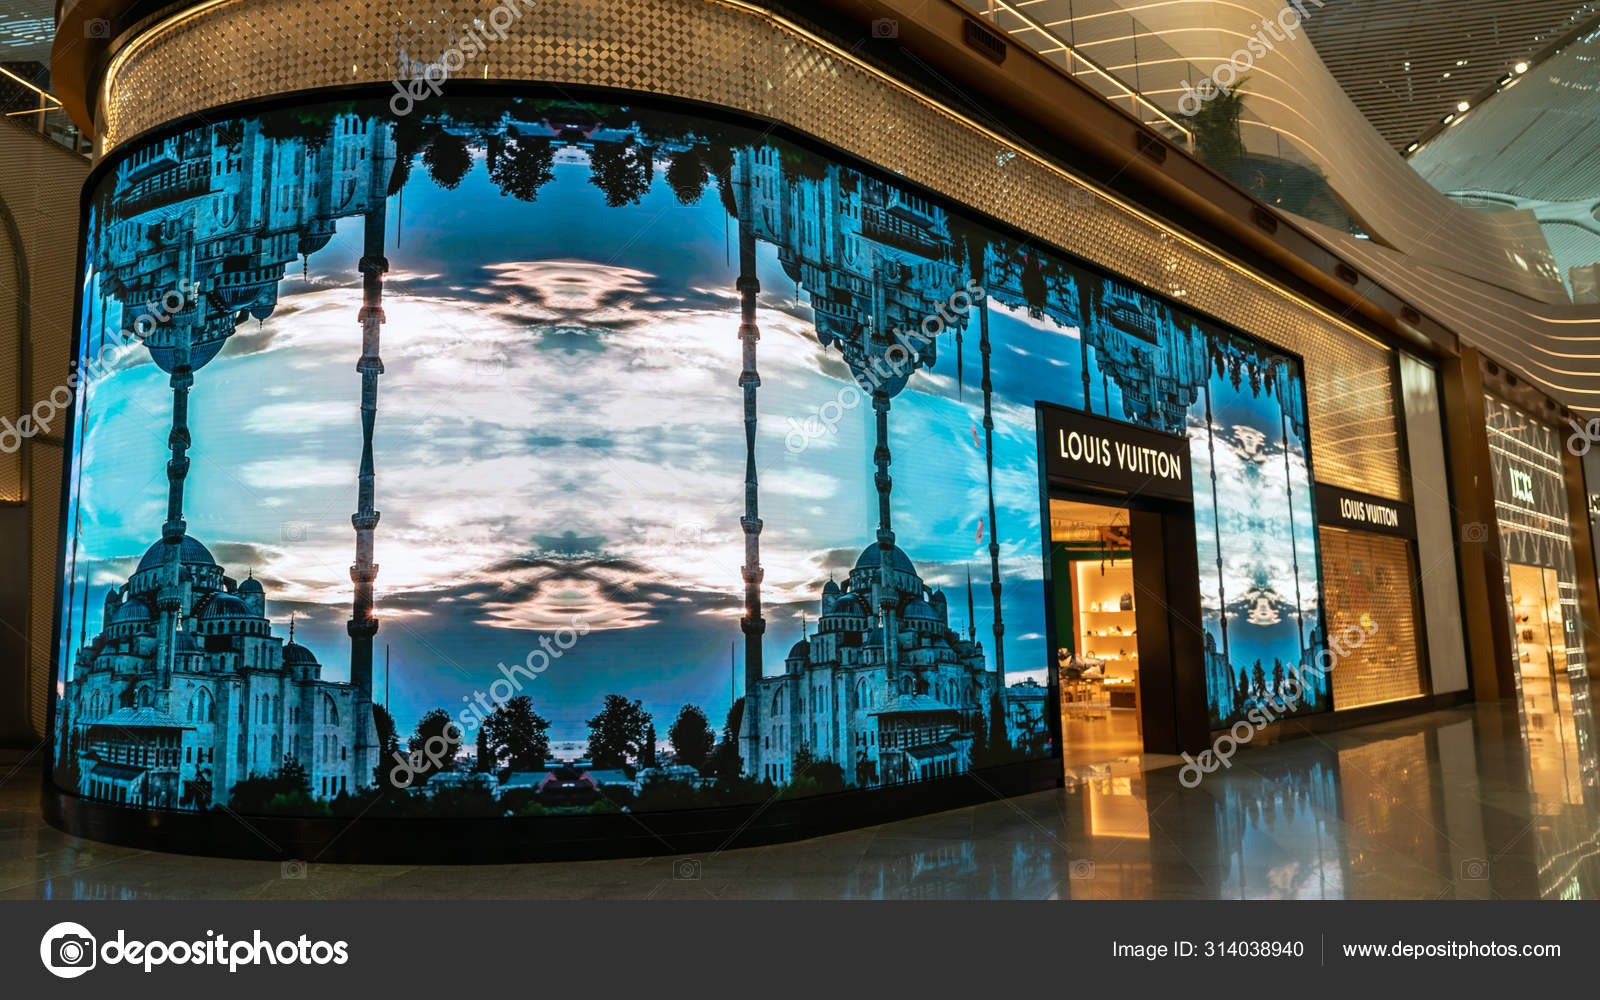 Louis Vuitton Store at Istanbul Airport 